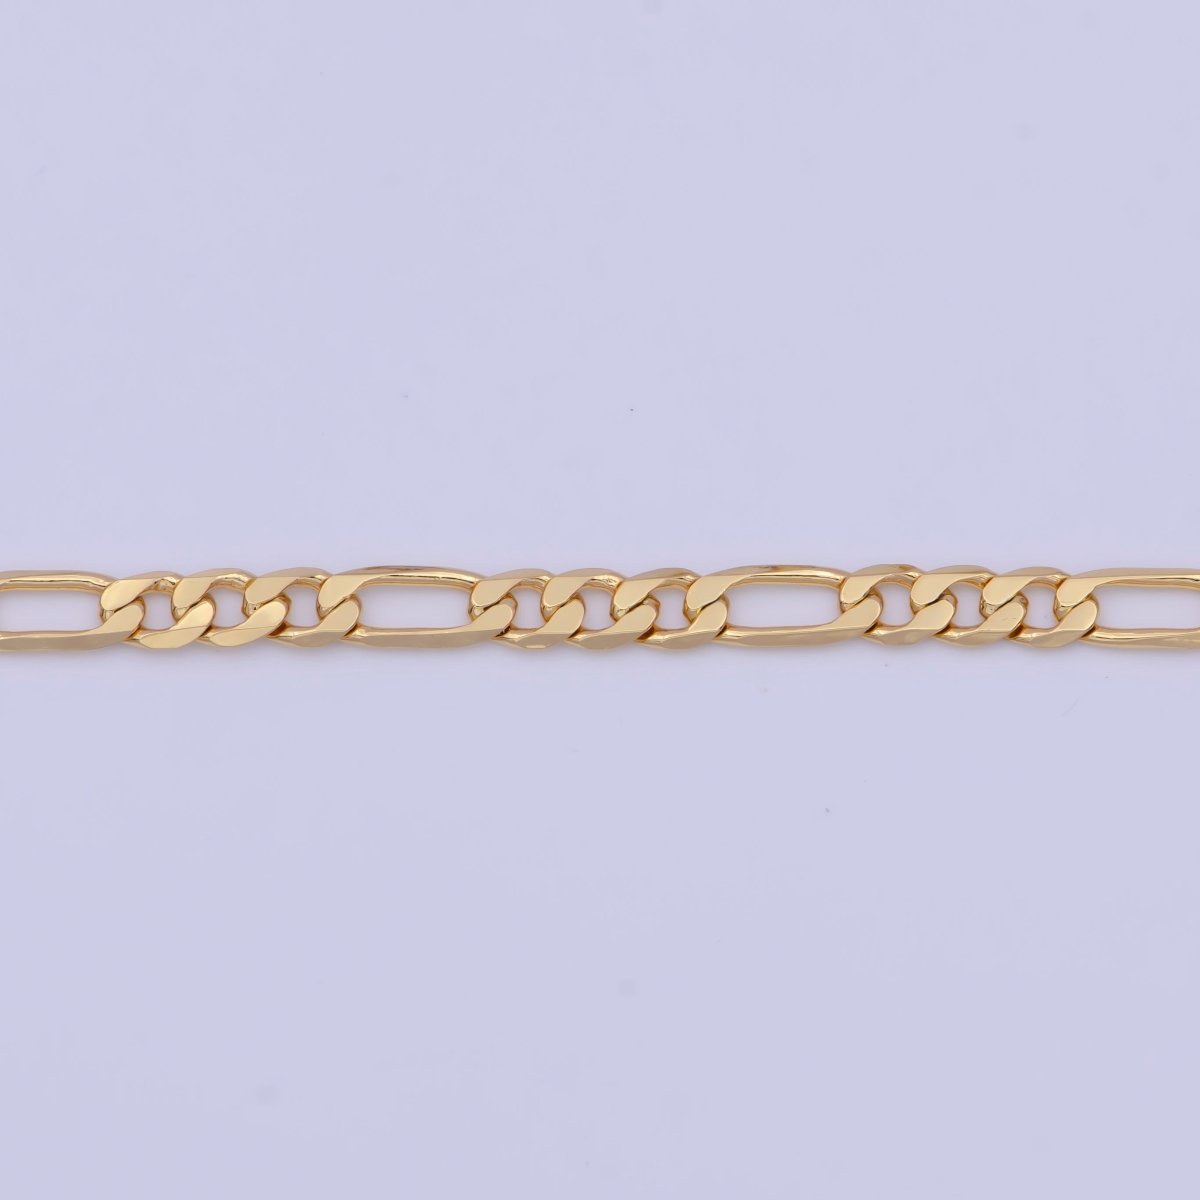 Ready to Use Gold Filled Figaro Necklace Chain, Layering Figaro Chain, Dainty 3.3mm Figaro Necklace w/Lobster Clasps | WA-1363 WA-1407 WA-1408 Clearance Pricing - DLUXCA